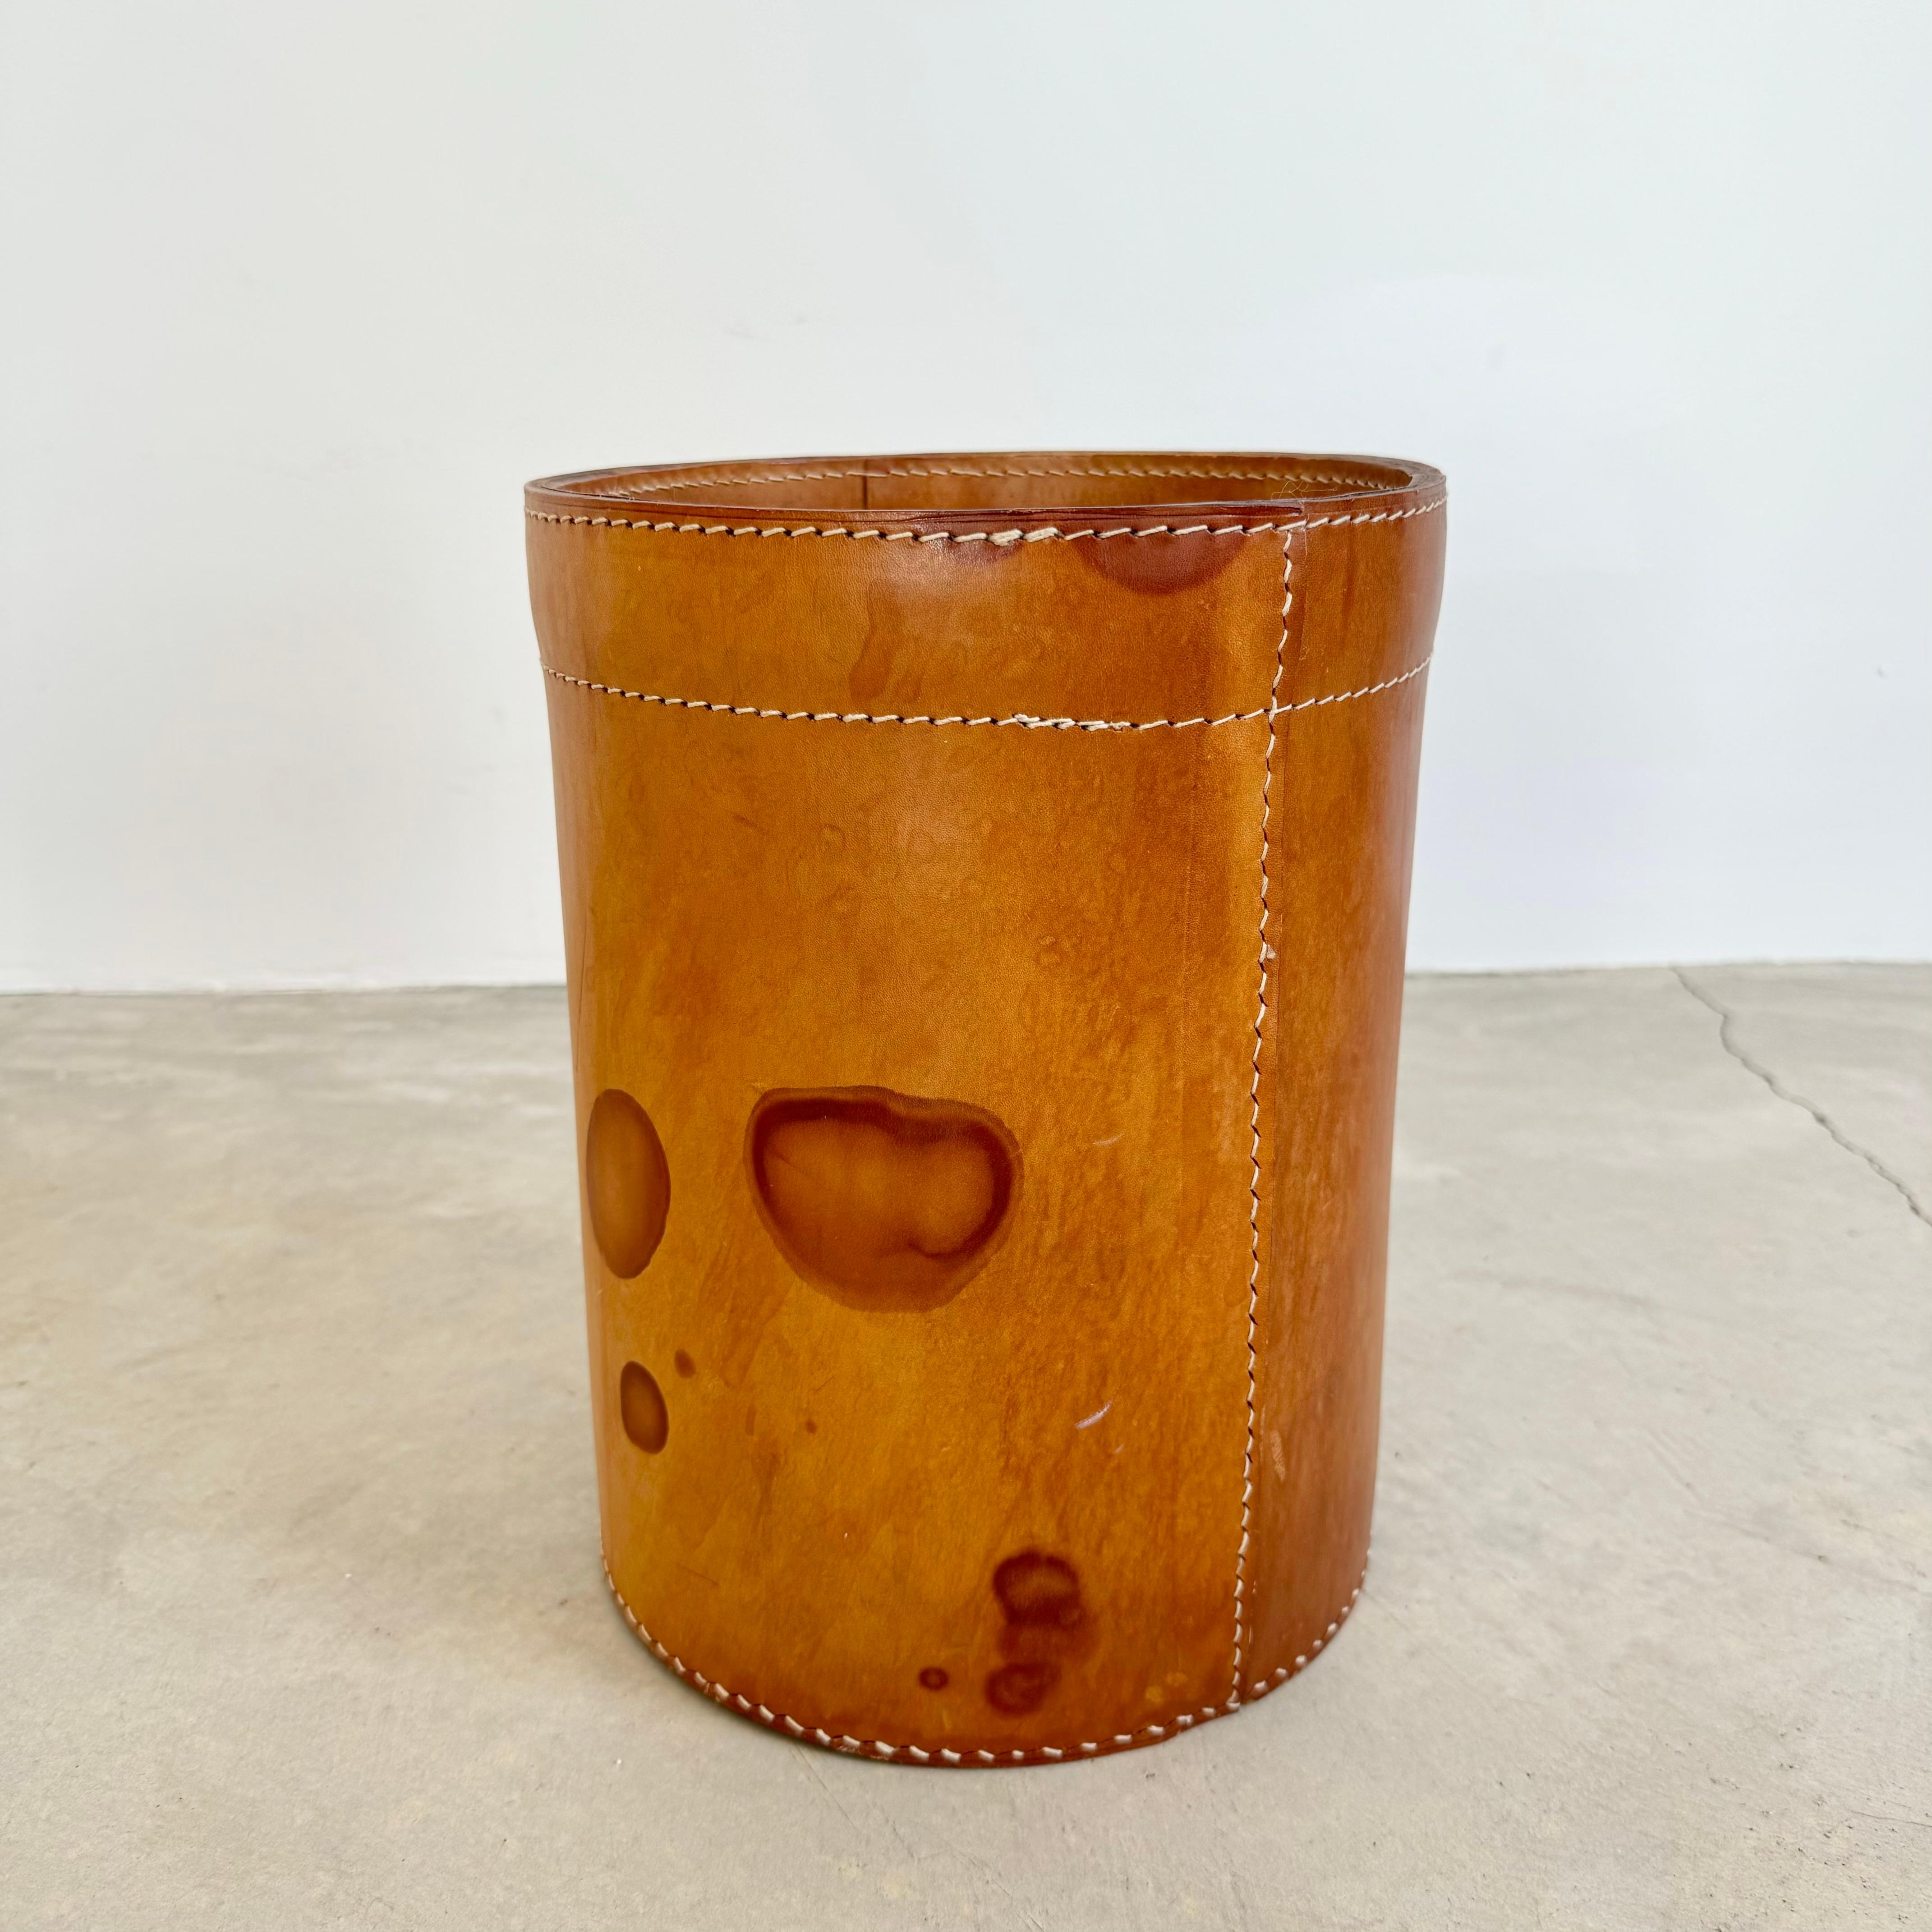 Handsome large saddle leather waste bin in the style of Jacques Adnet. Circa 1950s. Extremely thick cowhide with great color and age. Wear as shown. Great patina. Good vintage condition. 2 available. Priced individually.

In our Los Angeles showroom.